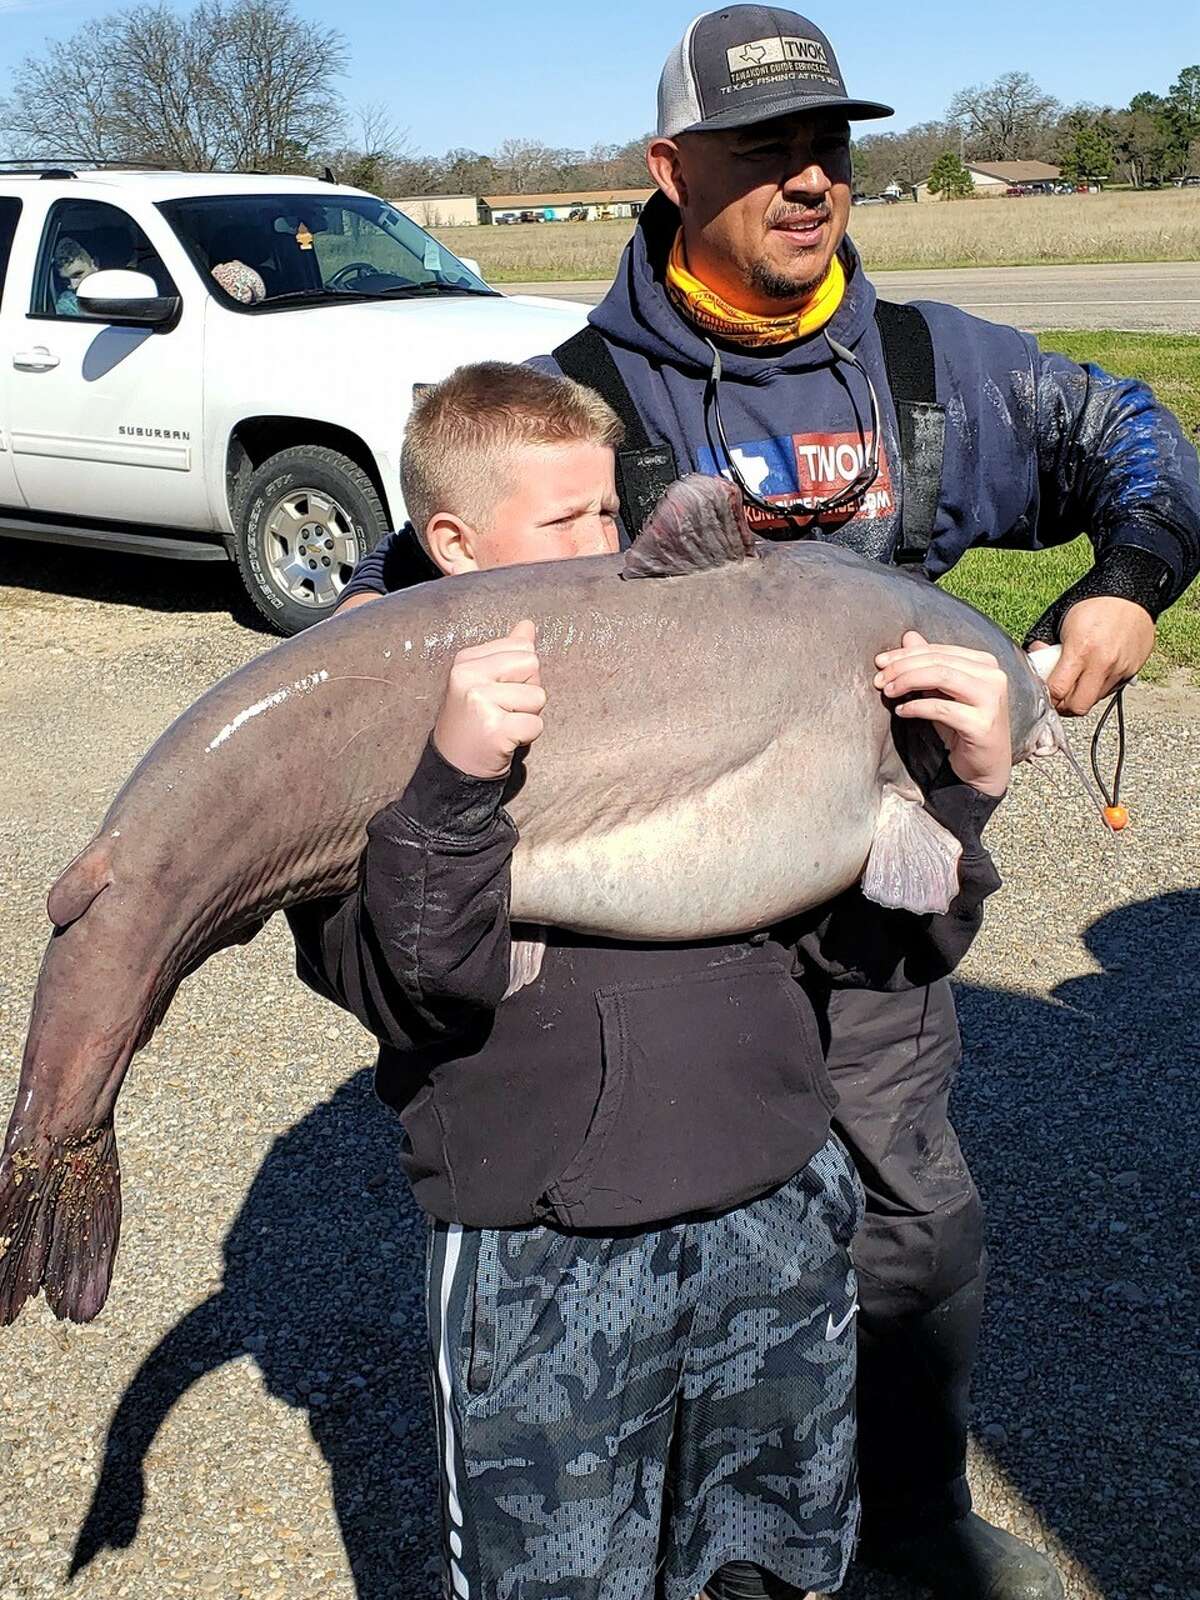 Brayden Rogers of Cisco hooked the massive blue catfish while fishing at Lake Tawakoni with Michael and Teri Littlejohn’s Guide Service.